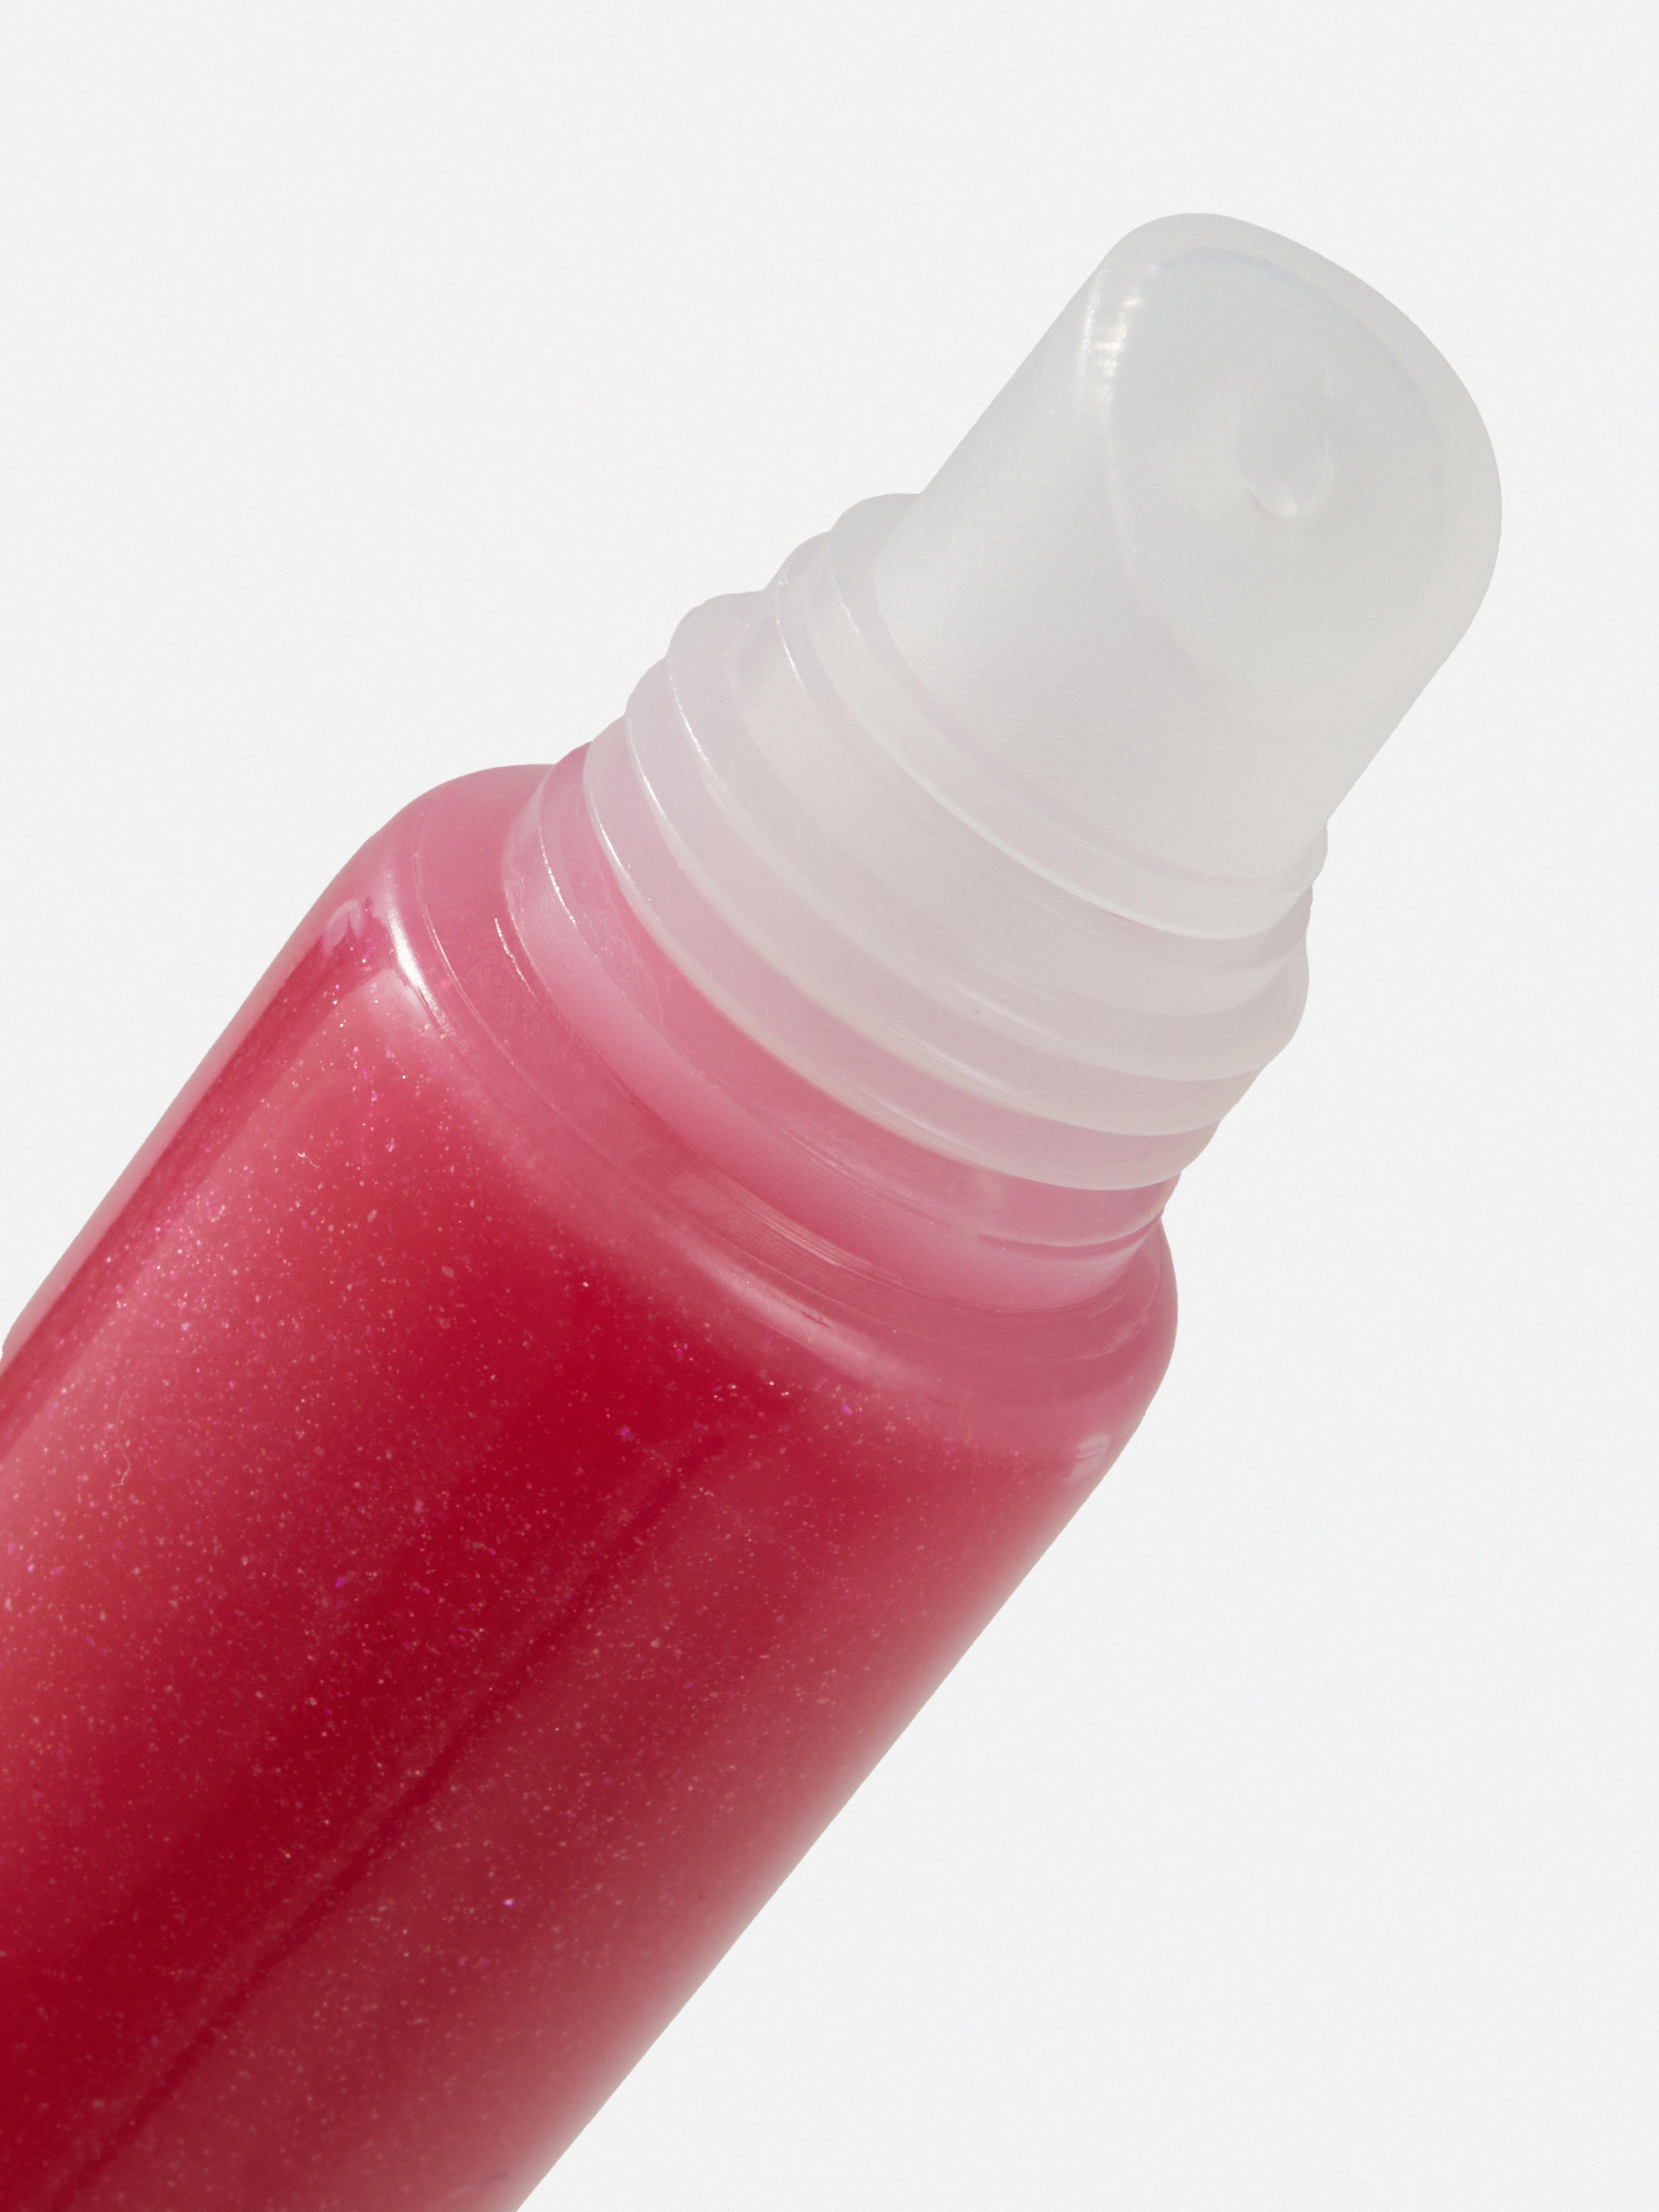 PS... Juicy Scented Lip Gloss